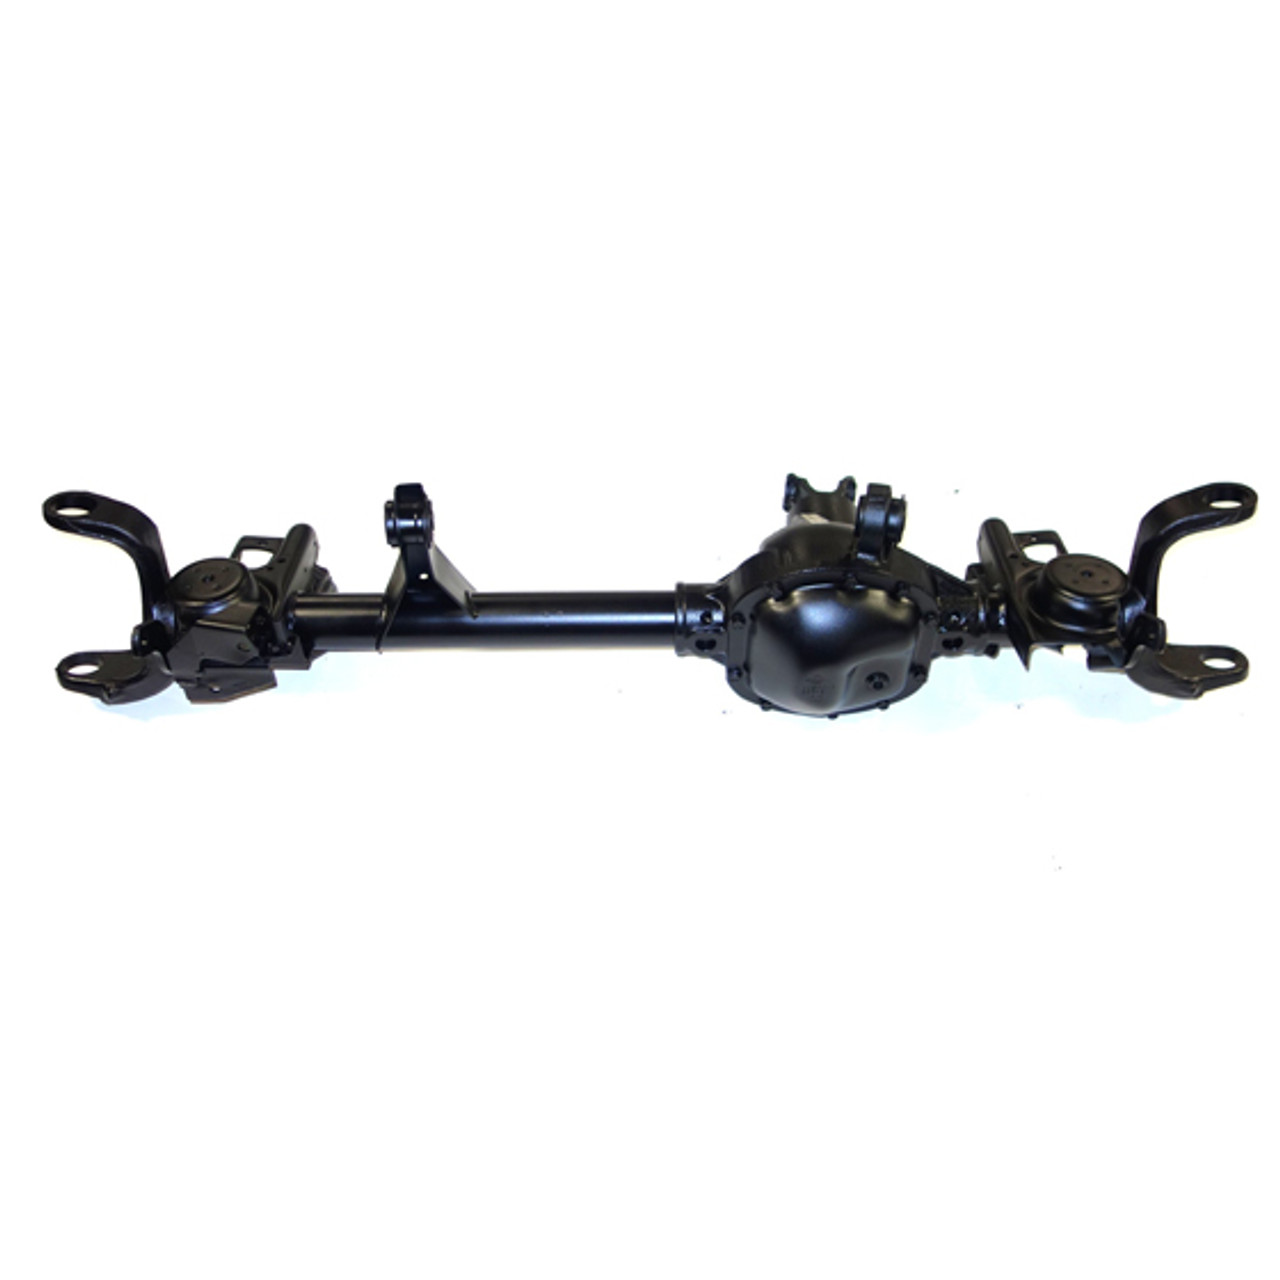 Reman Complete Axle Assembly for Dana 30 90-95 Jeep Wrangler 3.55 Ratio with ABS